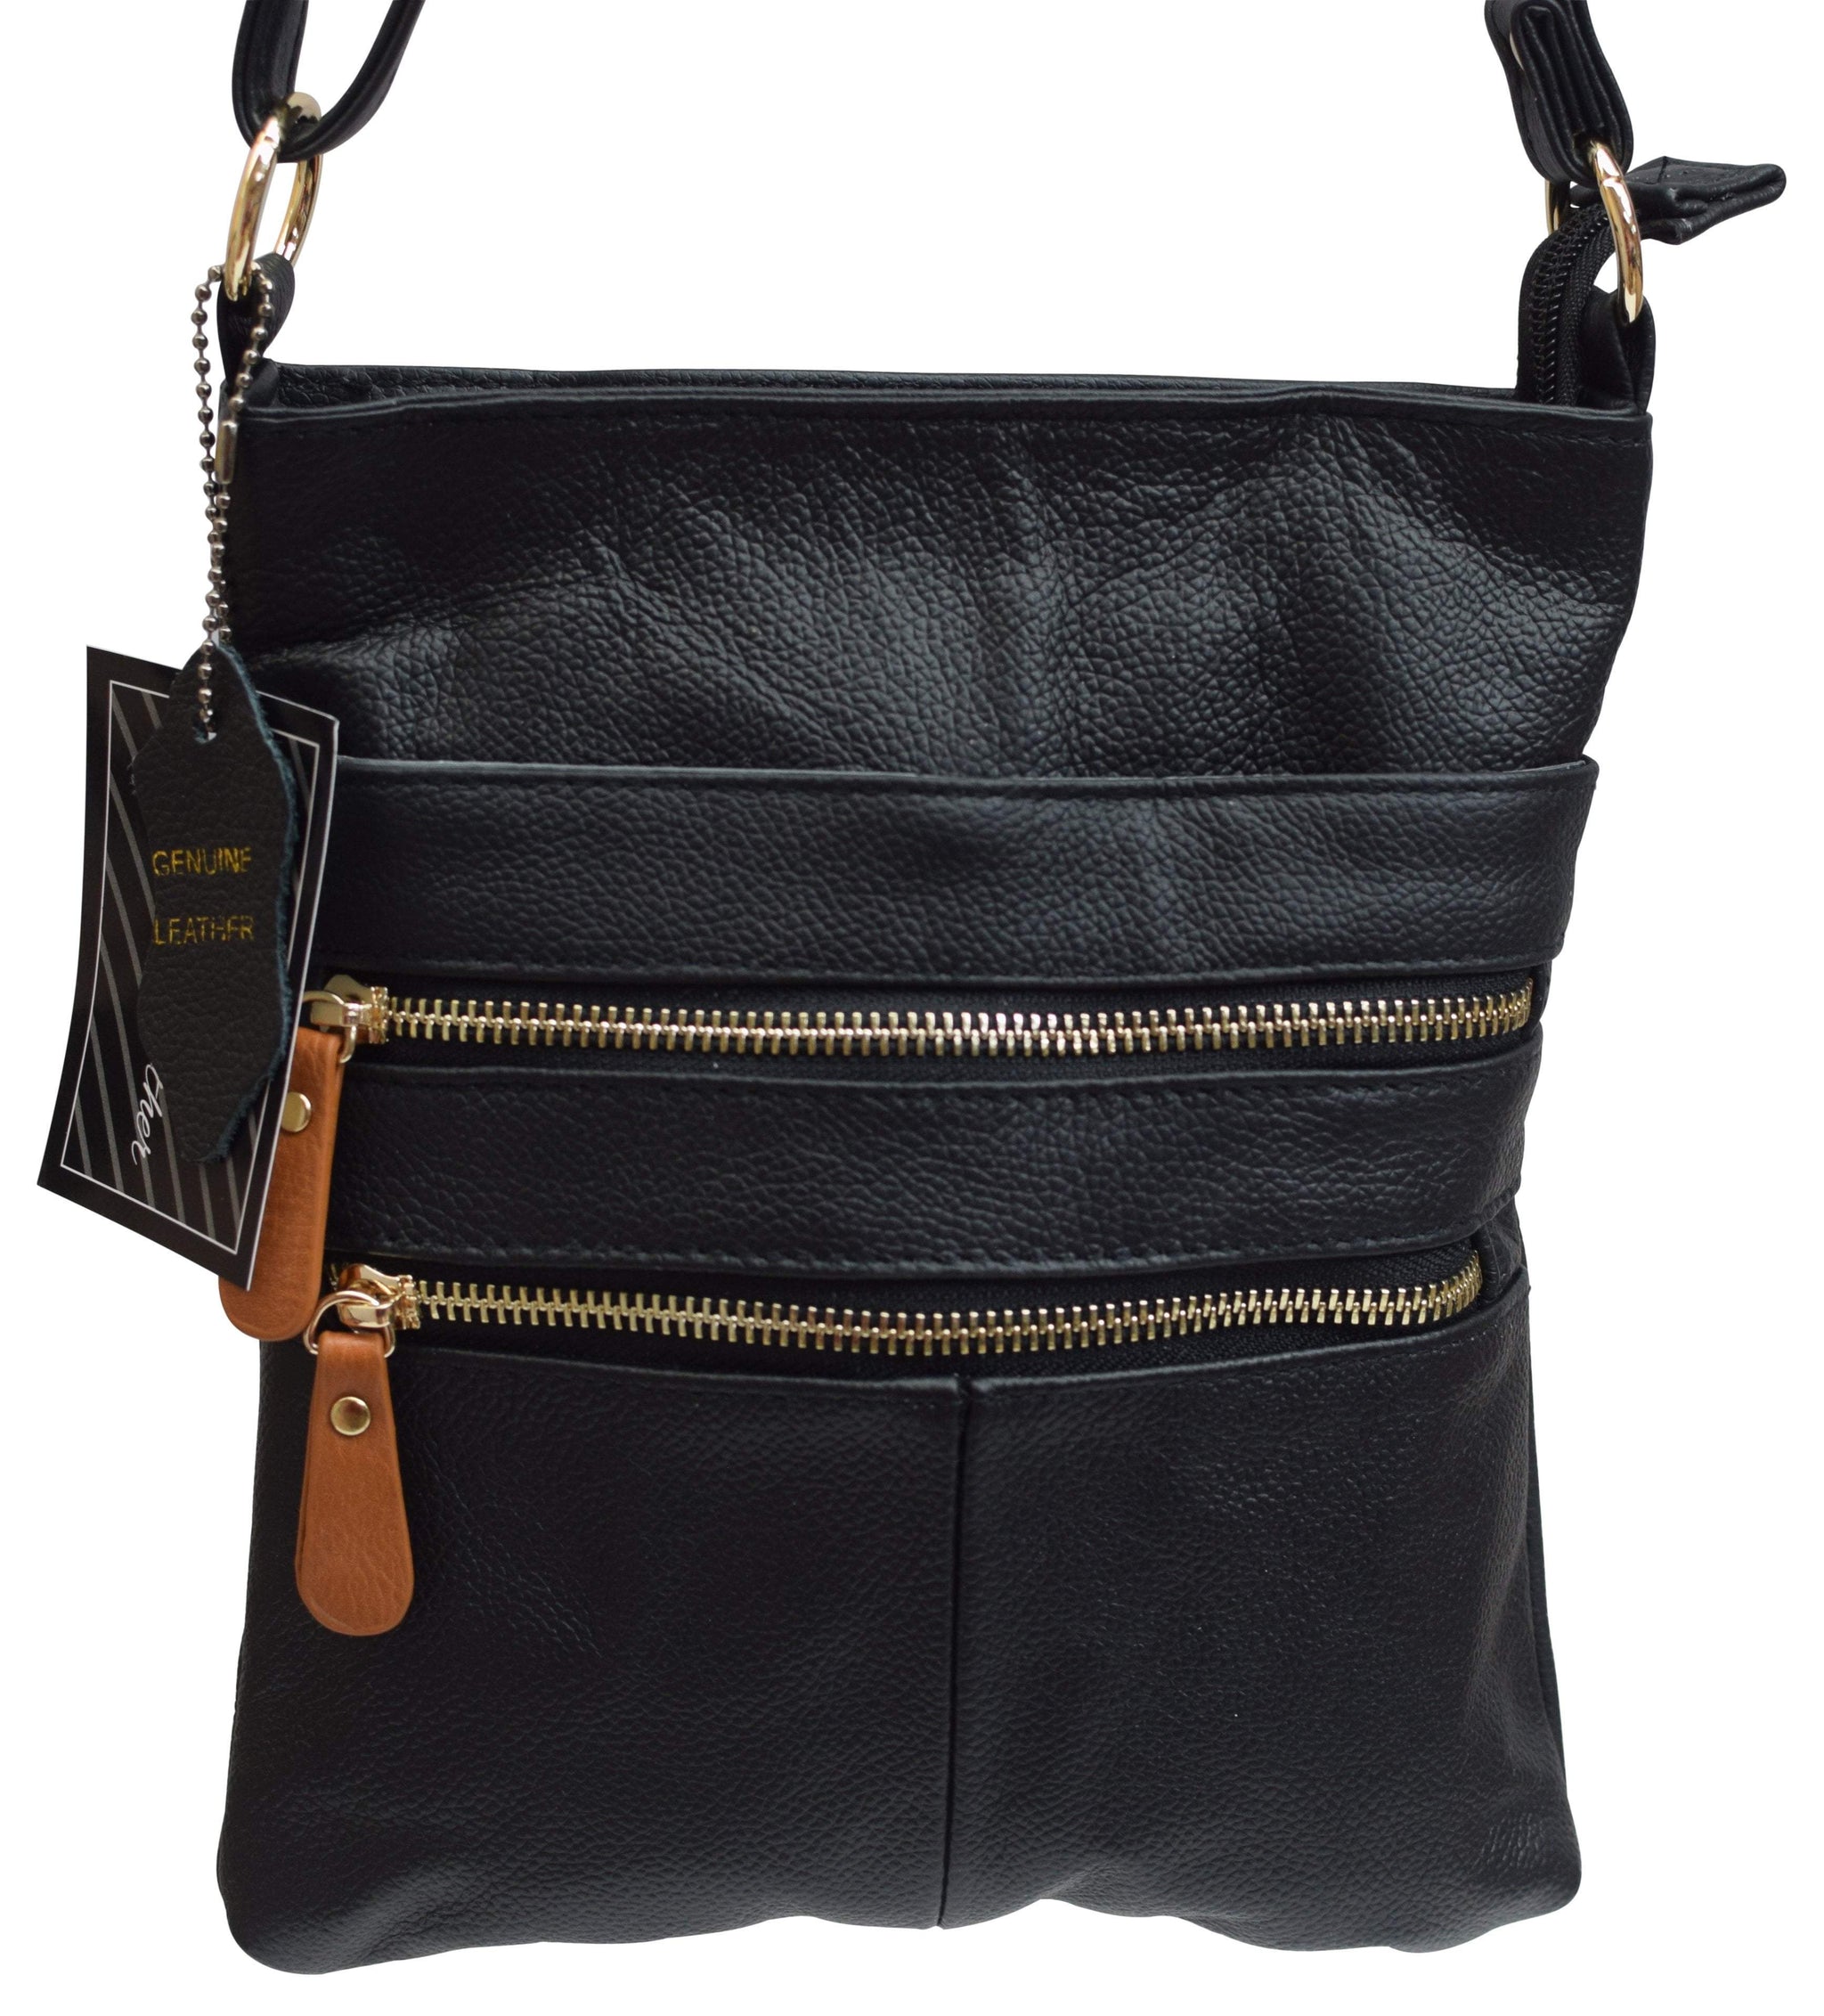 CHAMPS Champs Triple Zip Crossbody Black Leather Tote Bag 1027